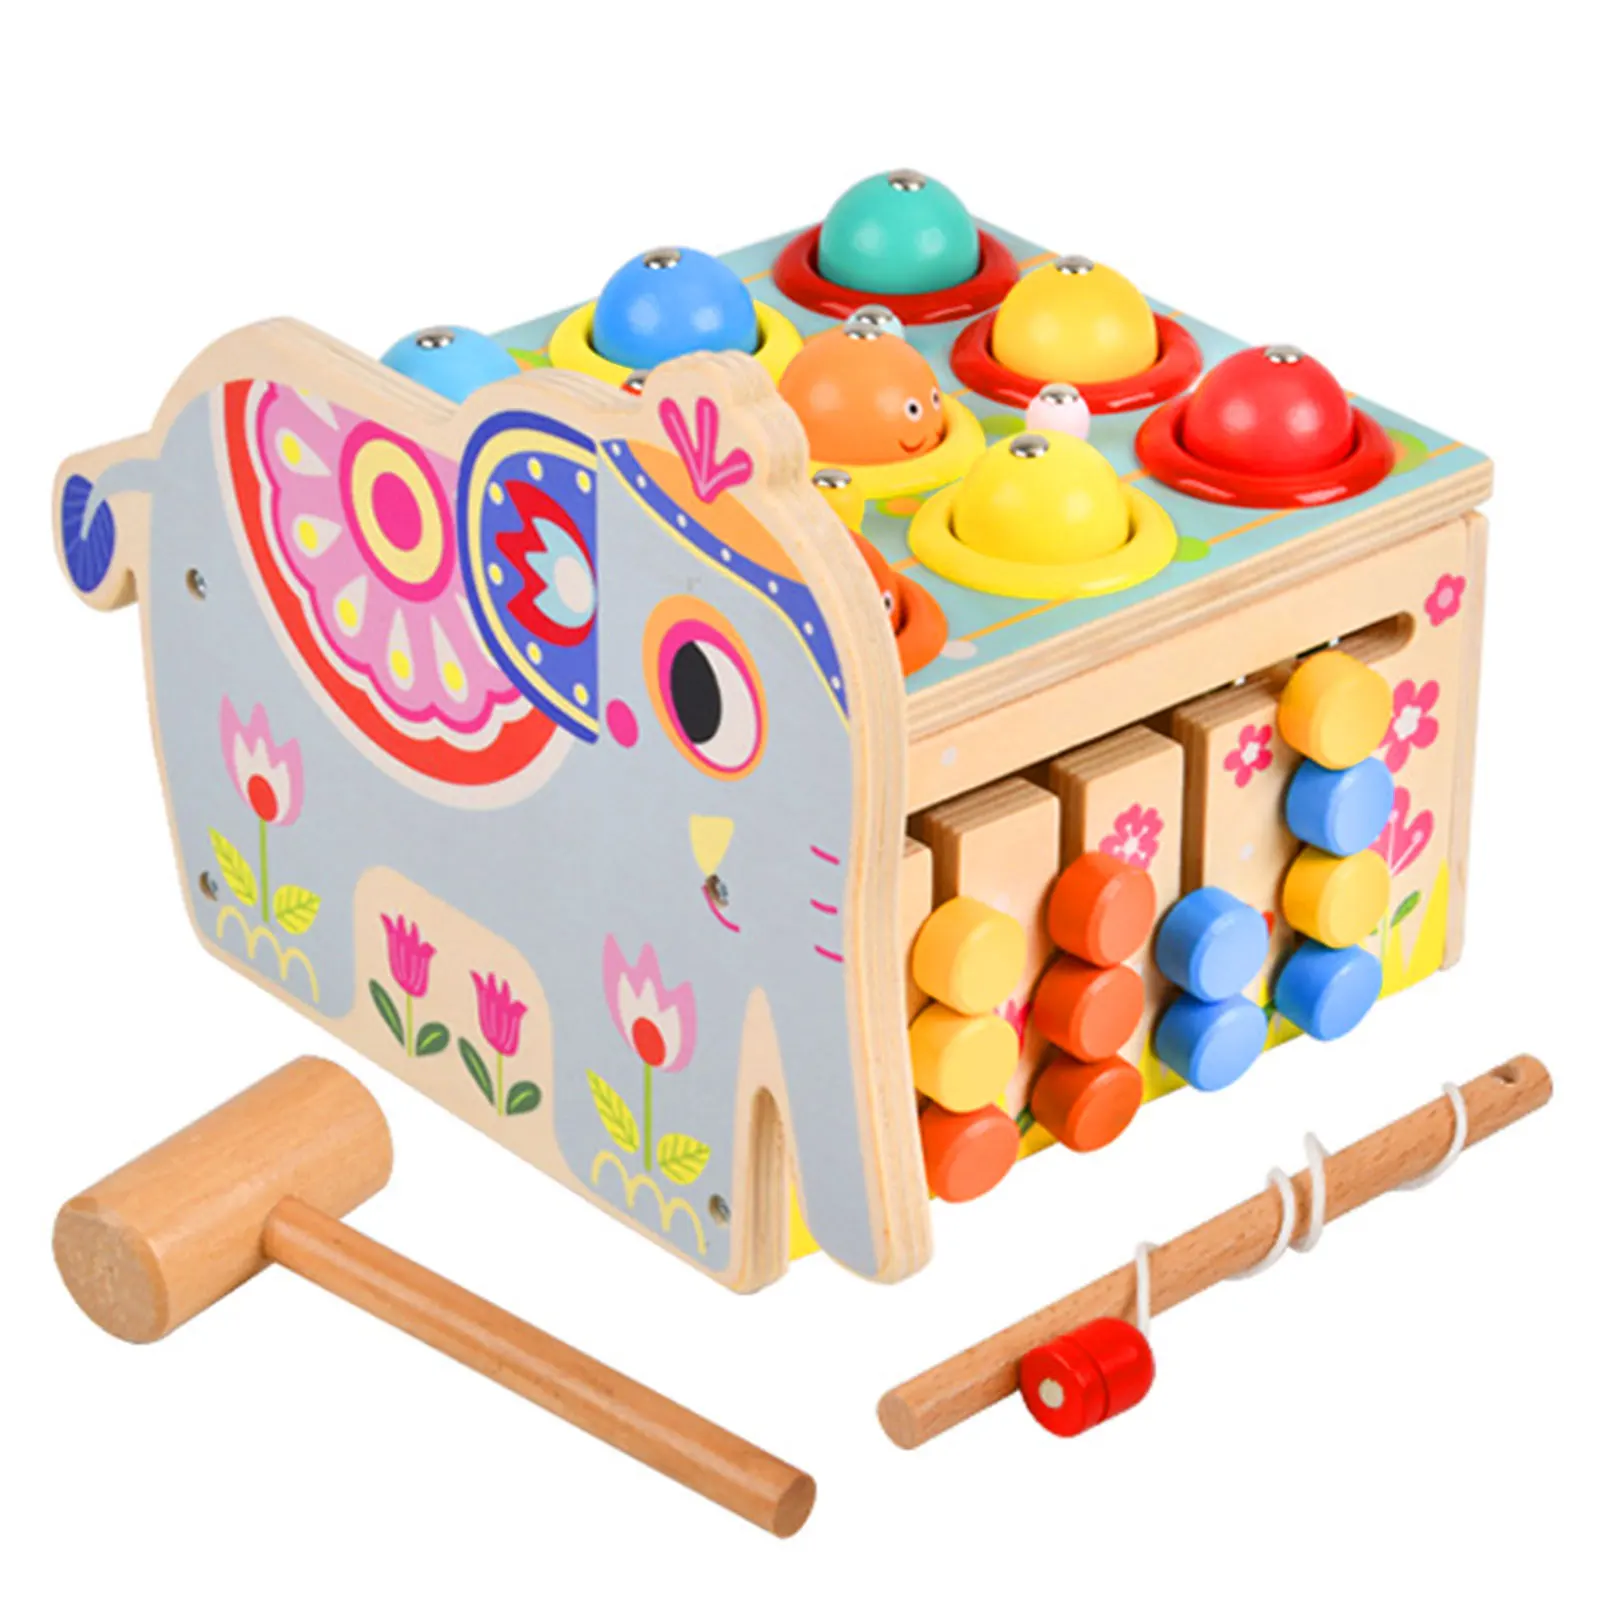 

Hammering Pounding Toys For Toddlers Montessori Learning Toys Sensory Developmental Tool For Toddlers Montessori Educational